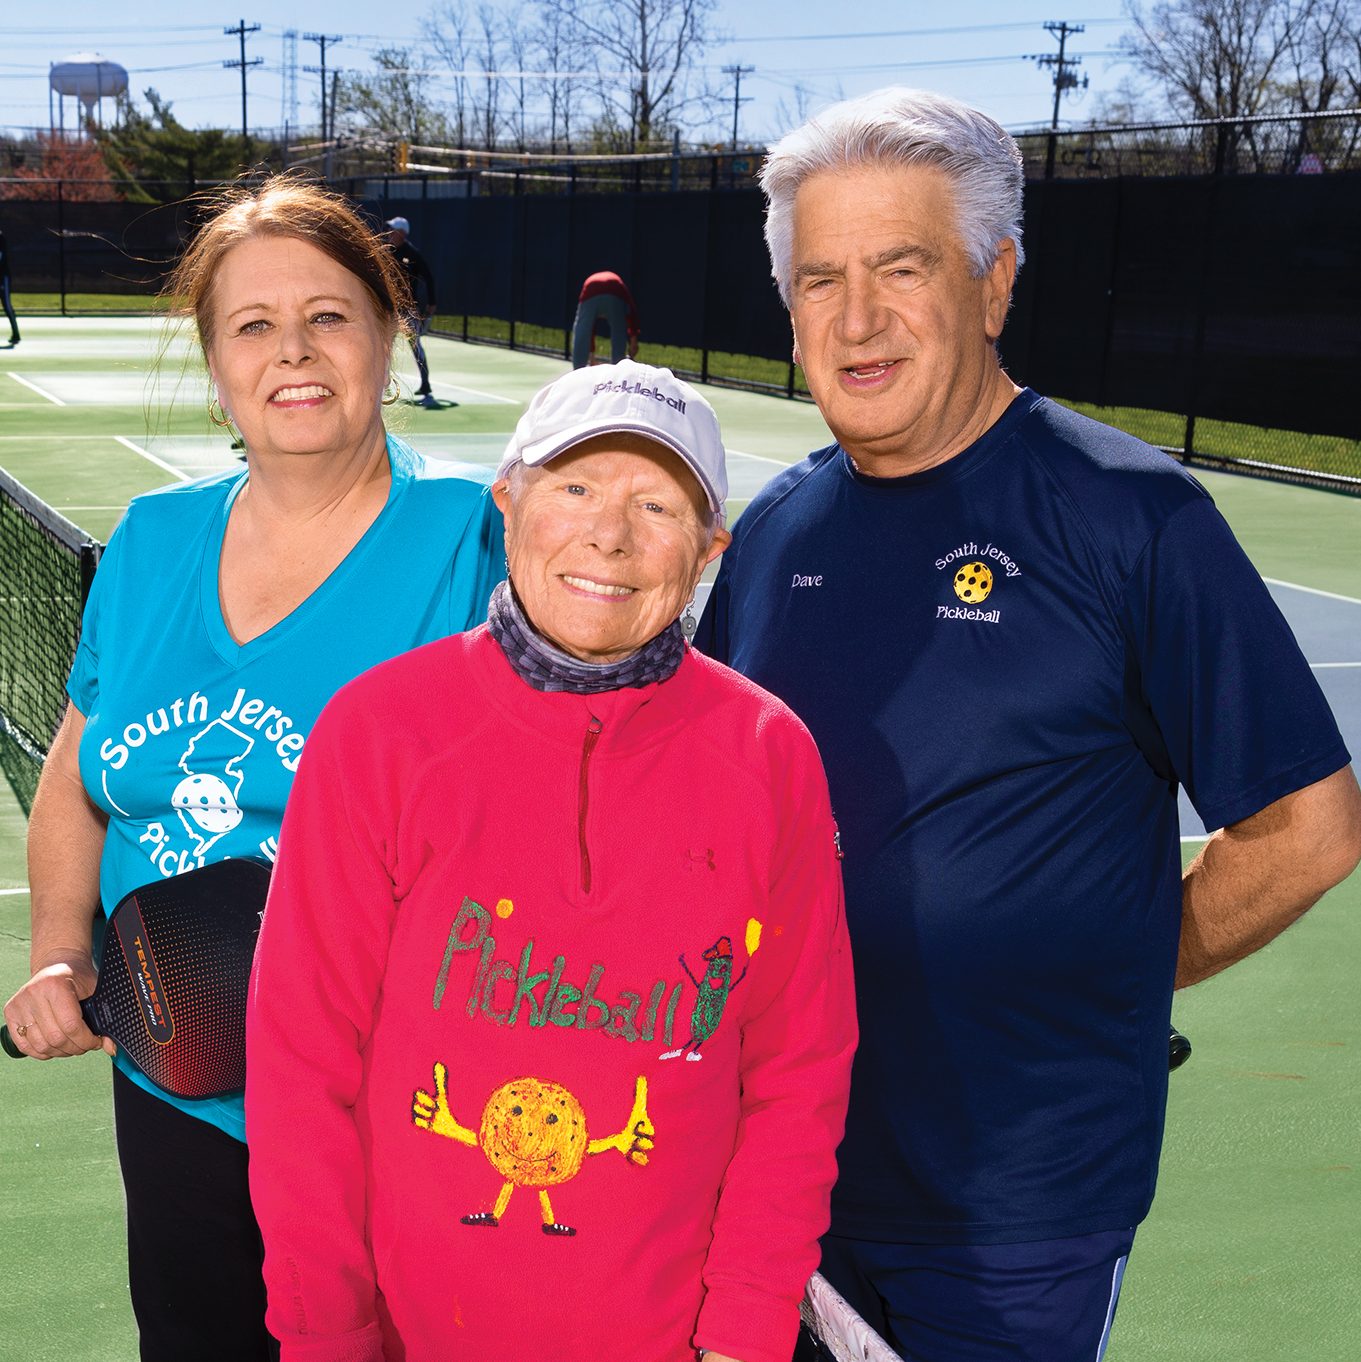 InPickleball | South Jersey Pickleball |  Denise Donald, Estelle “Cookie” Sey, and Dave Graham